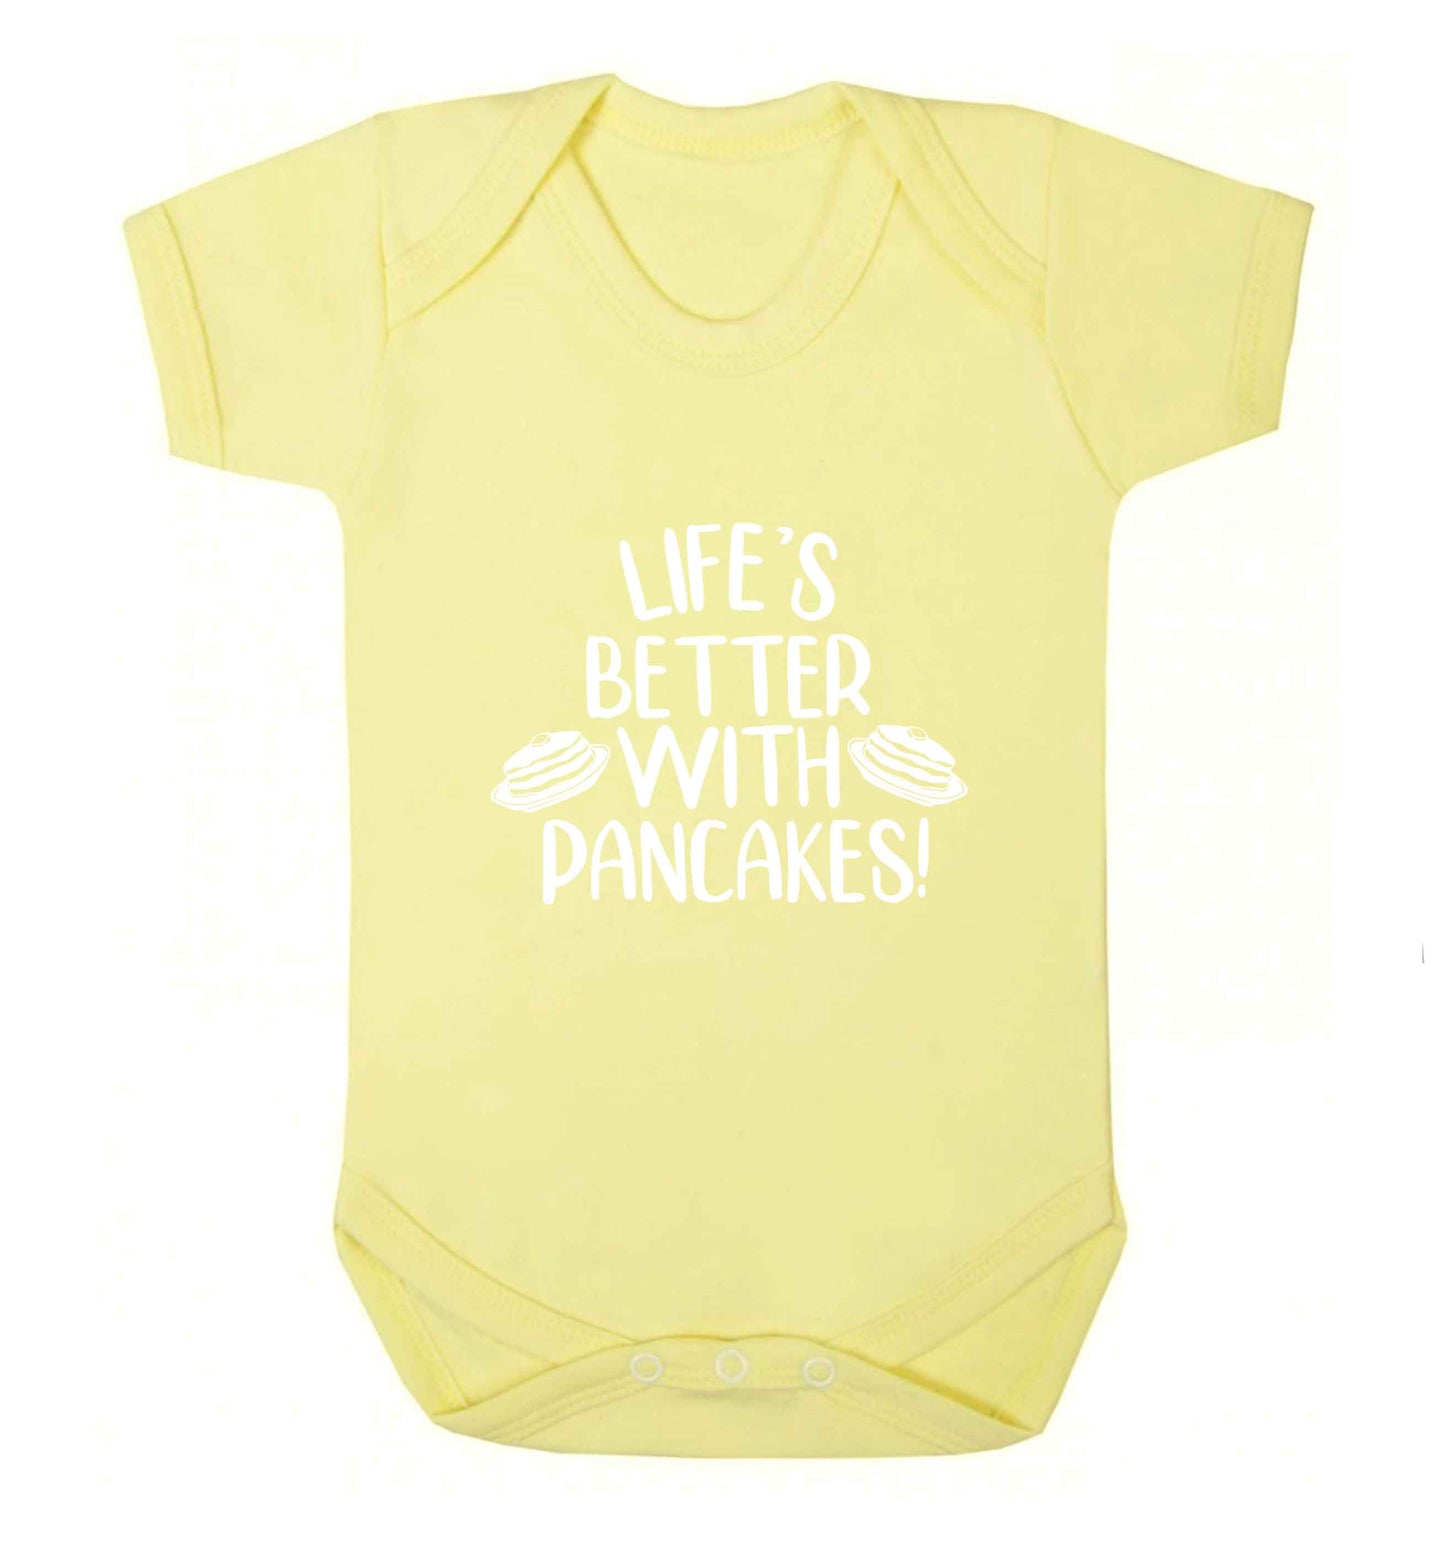 Life's better with pancakes baby vest pale yellow 18-24 months